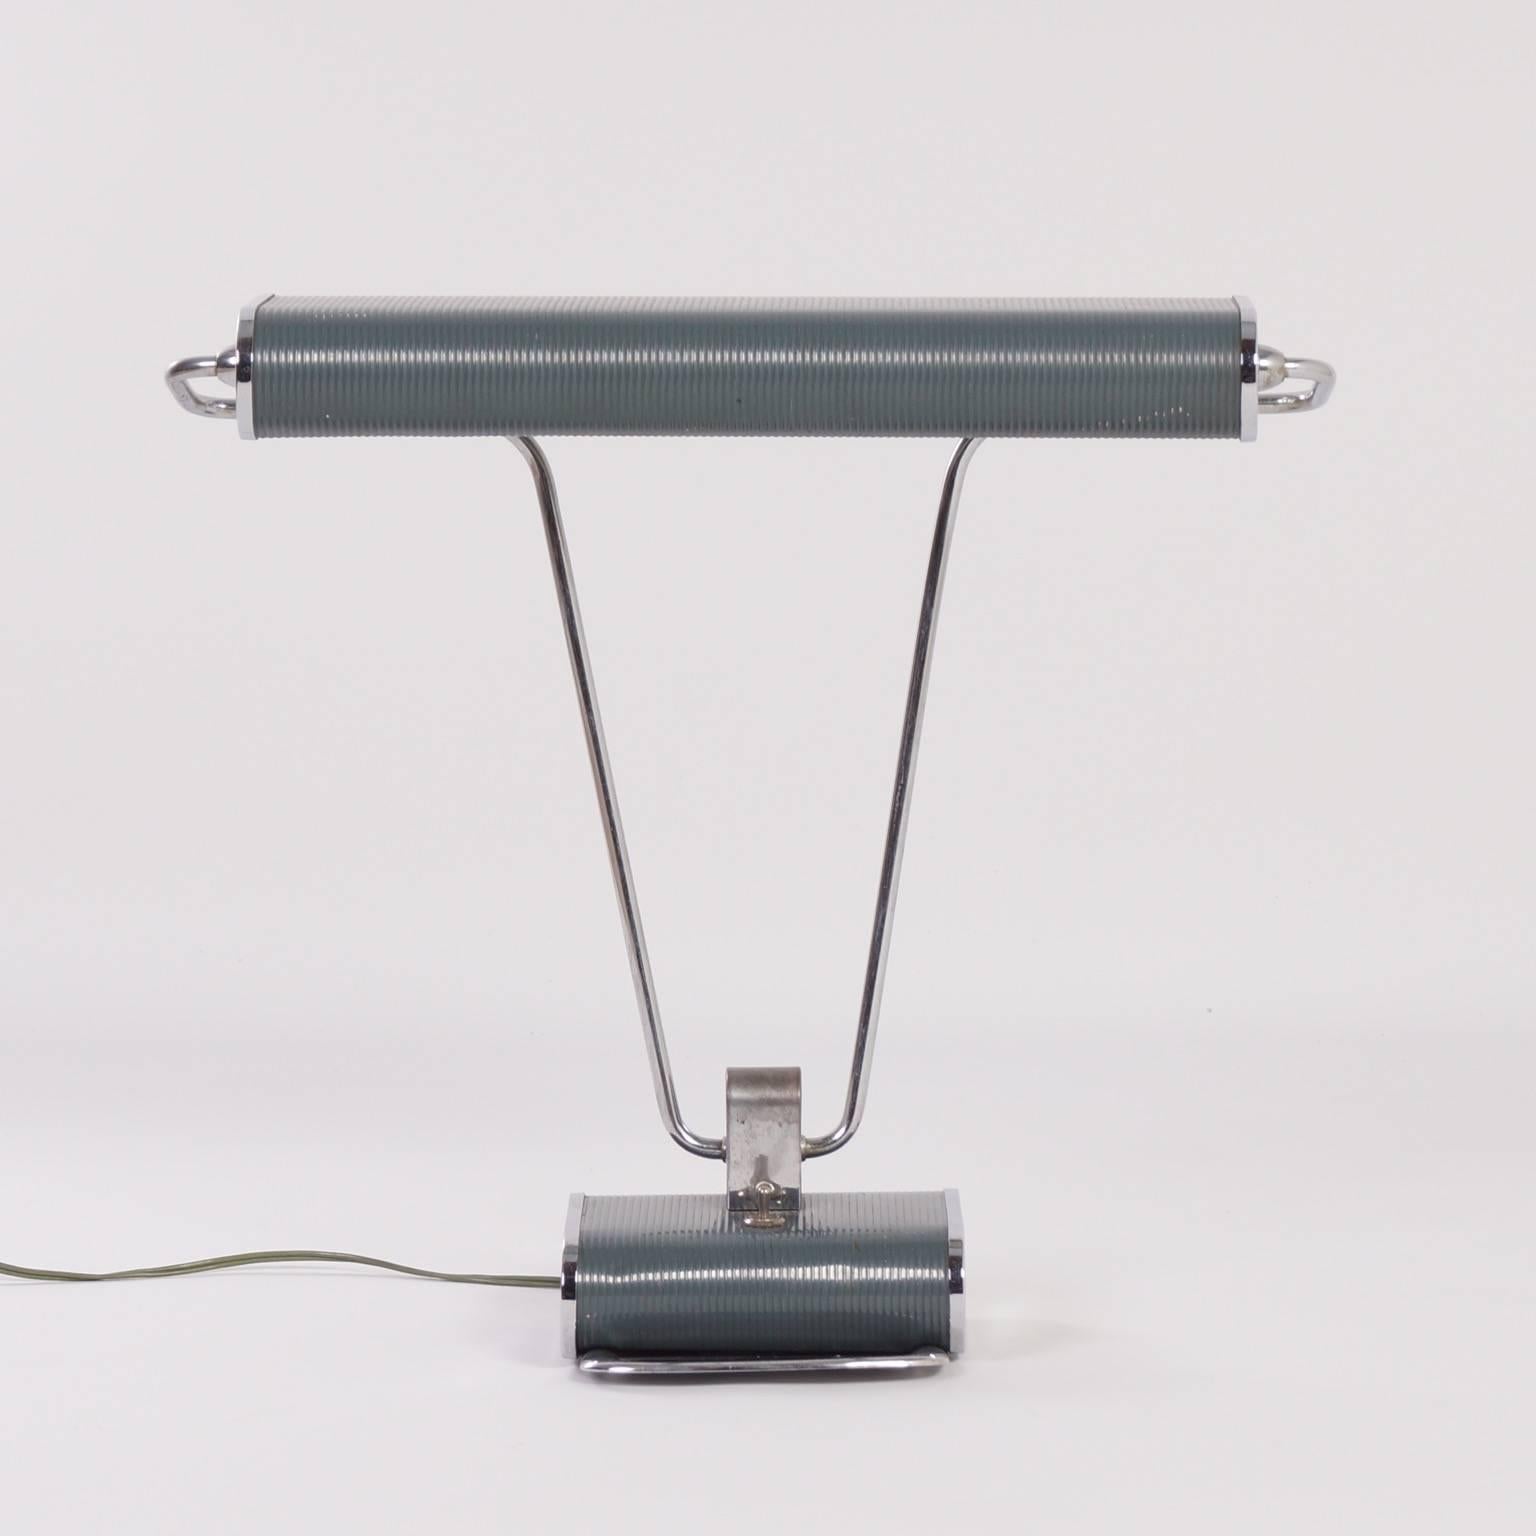 Lacquered Art Deco Desk Lamp by Eileen Gray for Jumo, 1930s For Sale